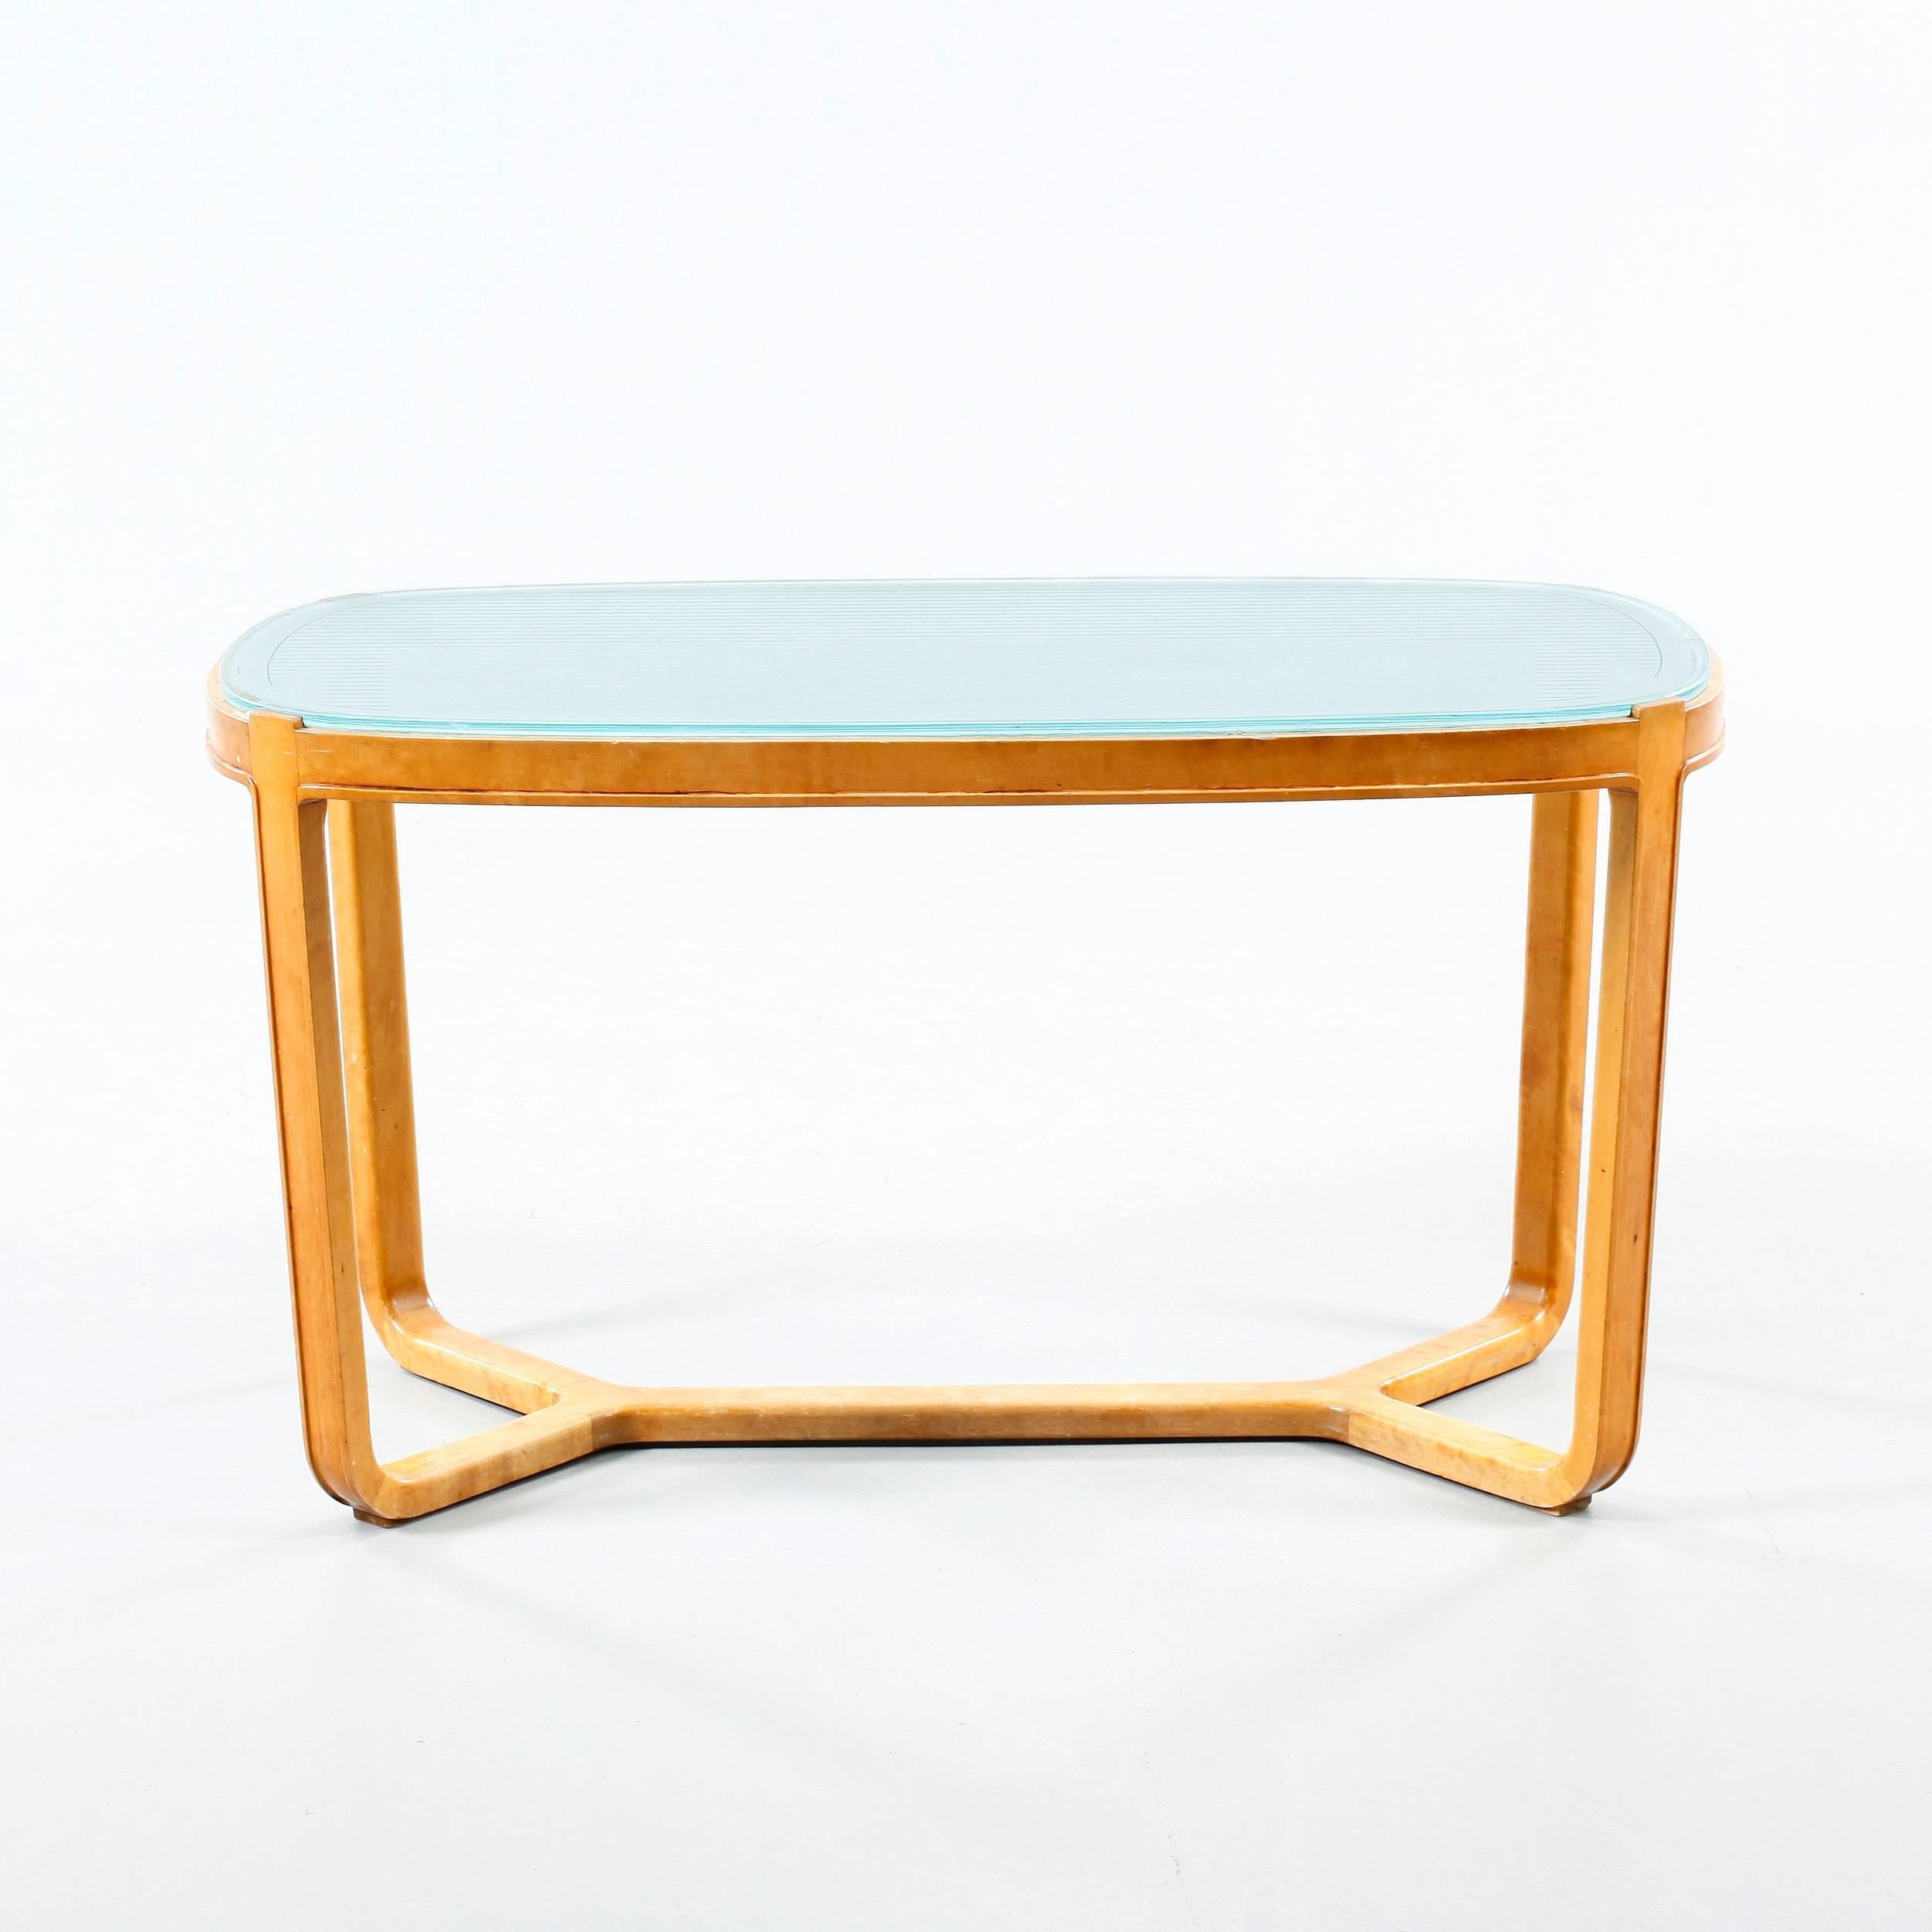 Art Deco coffee table model '103' produced by Bodafors Svenska Möbelfabriken in Sweden in 1930. Made in birchwood and new clear glass top (not in the picture).